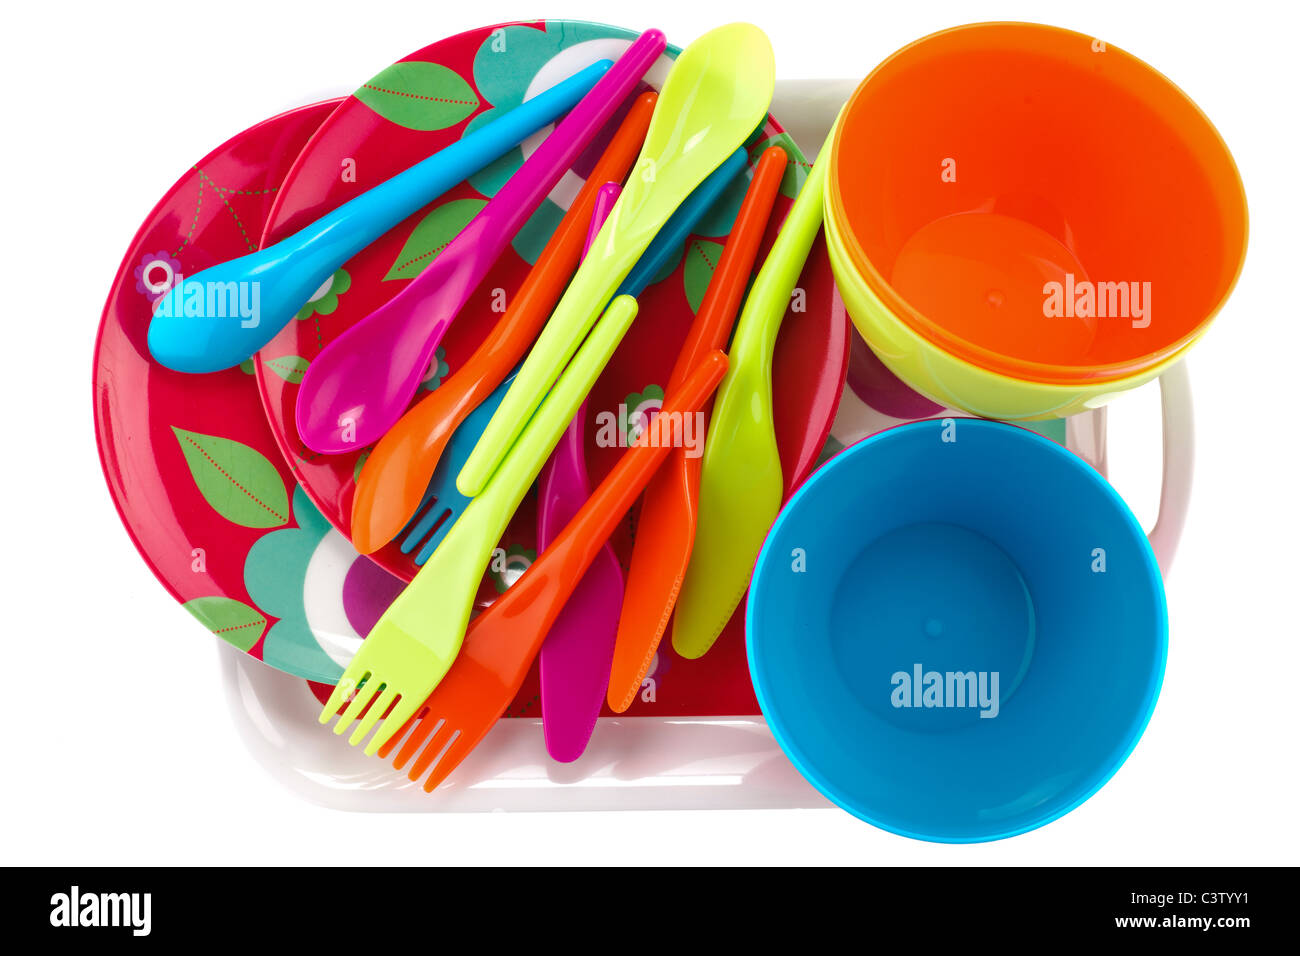 Pile of coloured plastic cutlery plates and dishes on a plastic tray Stock Photo